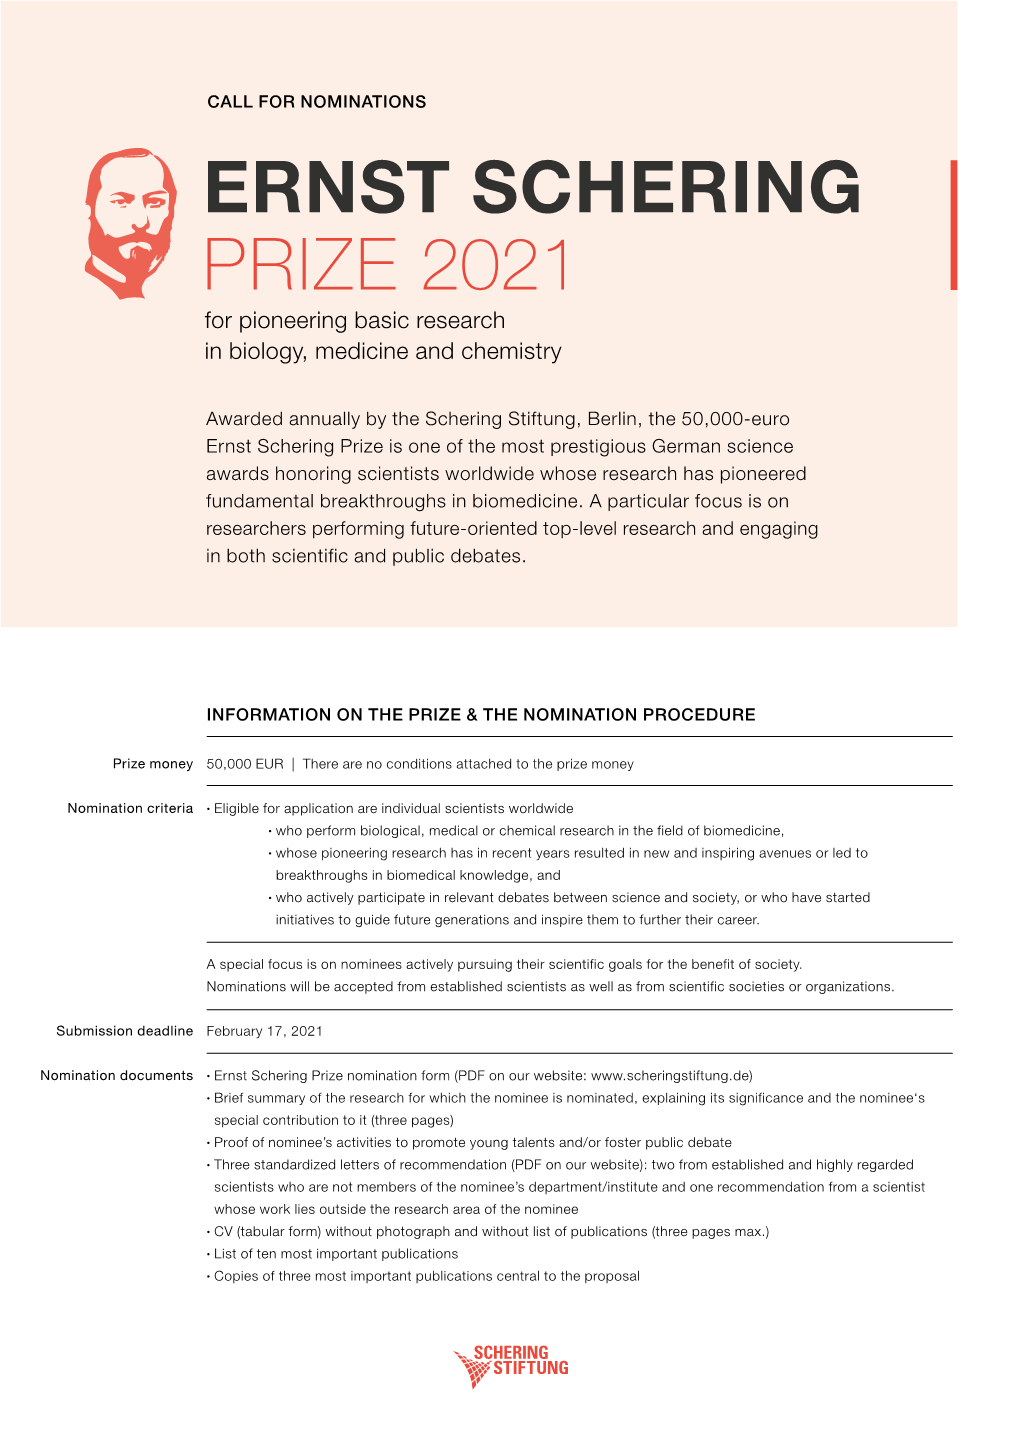 ERNST SCHERING PRIZE 2021 for Pioneering Basic Research in Biology, Medicine and Chemistry